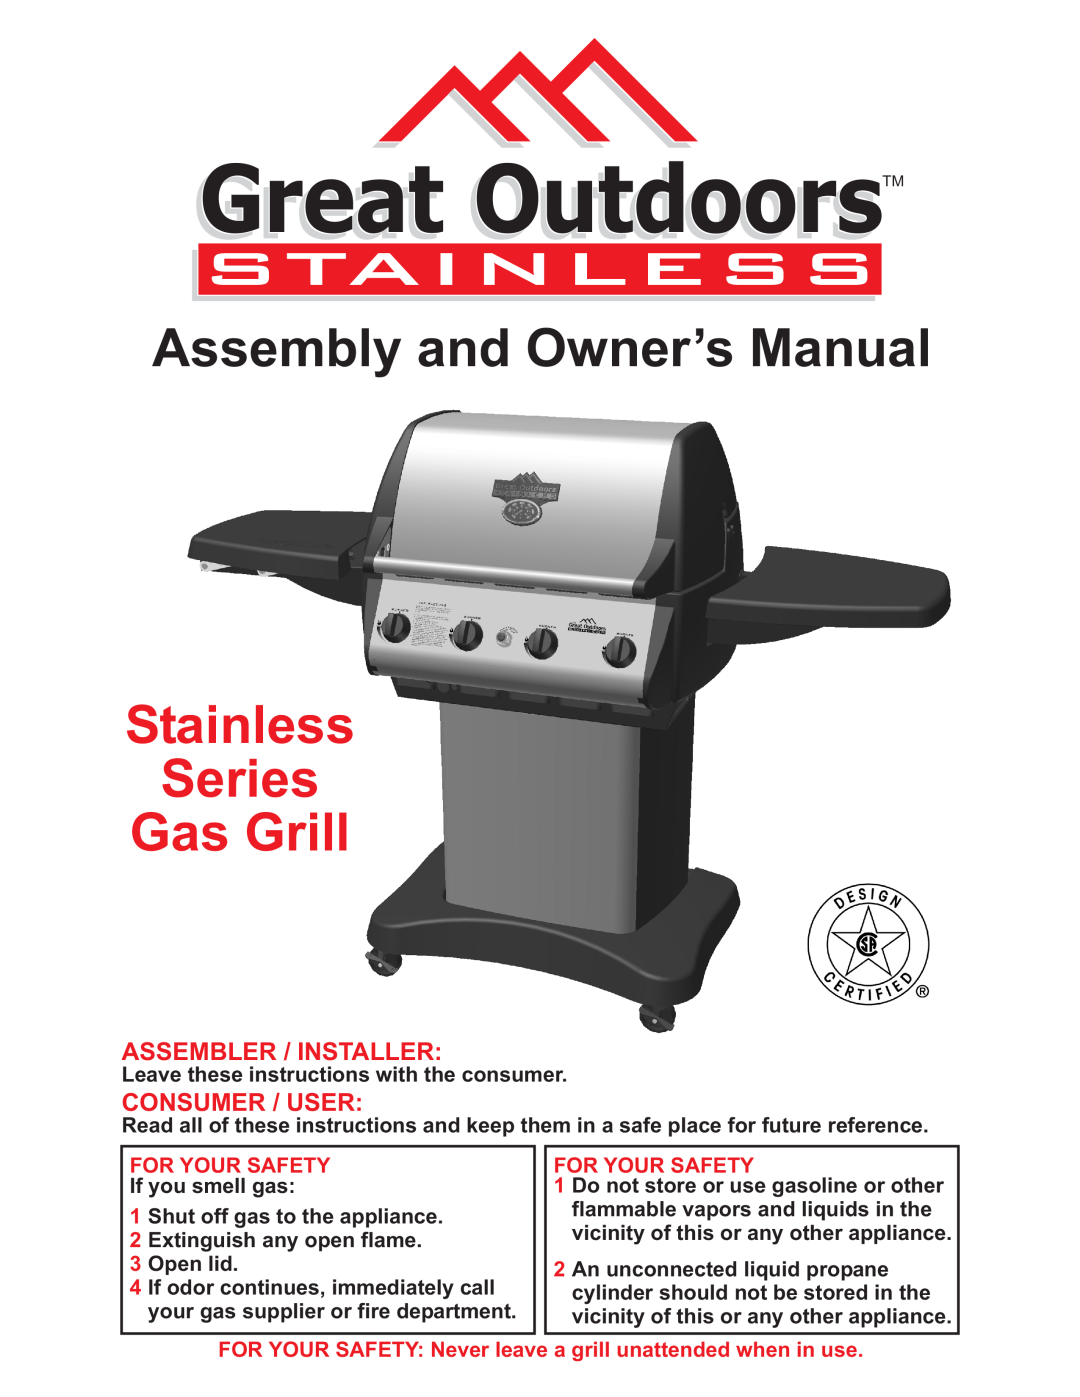 Vermont Casting owner manual Stainless Series Gas Grill, Great OutdoorsTM, Assembler / Installer, Consumer / User 